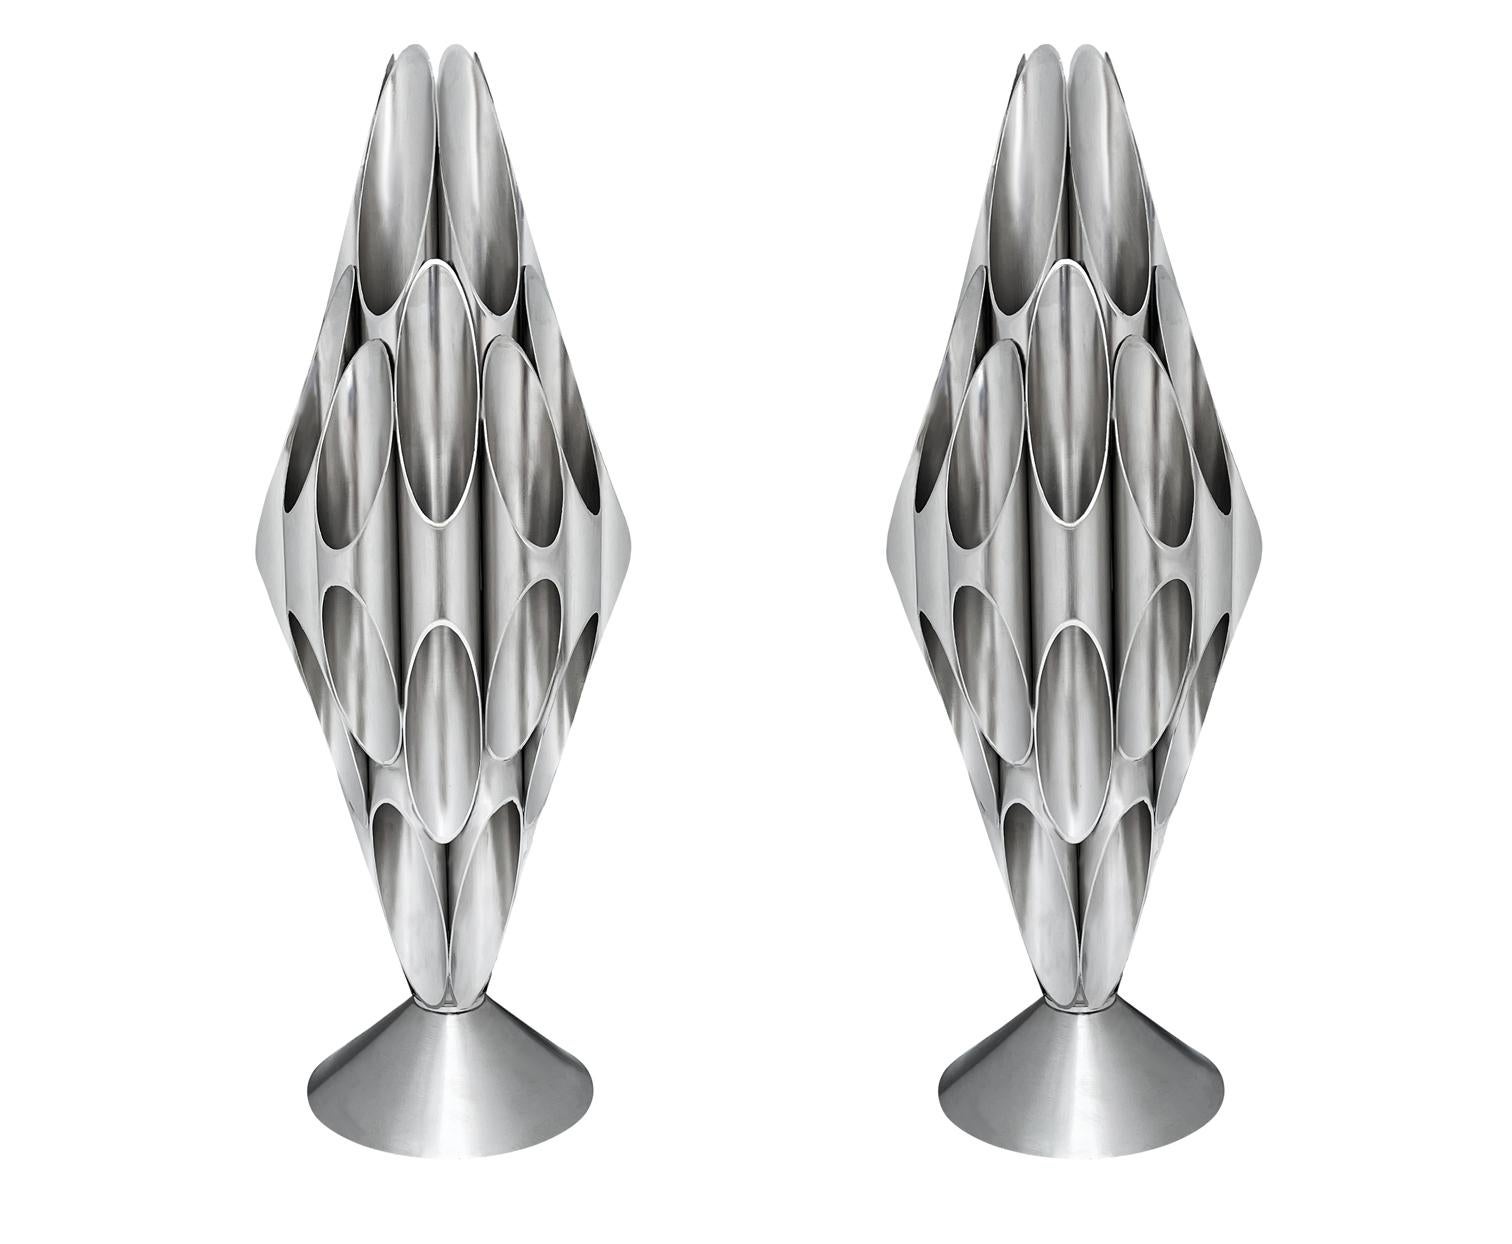 Pair of Hollywood Regency Space Age Accent Table Sculpture Lamps in Chrome In New Condition For Sale In Philadelphia, PA